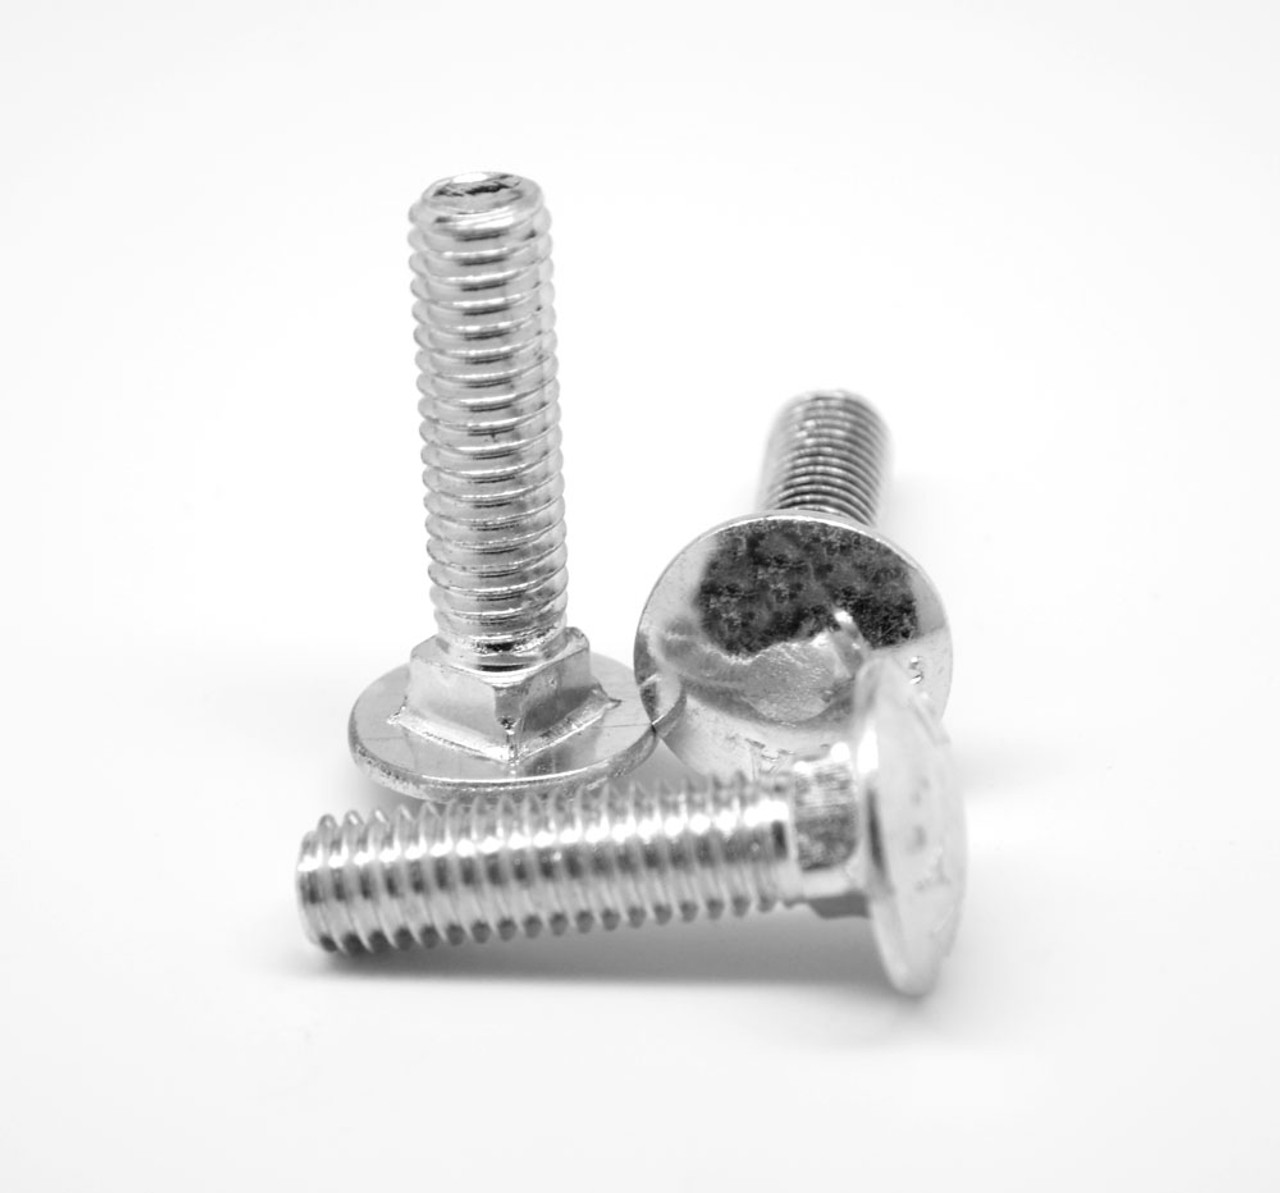 1/4"-20 x 1 1/4" Coarse Thread Carriage Bolt Stainless Steel 18-8